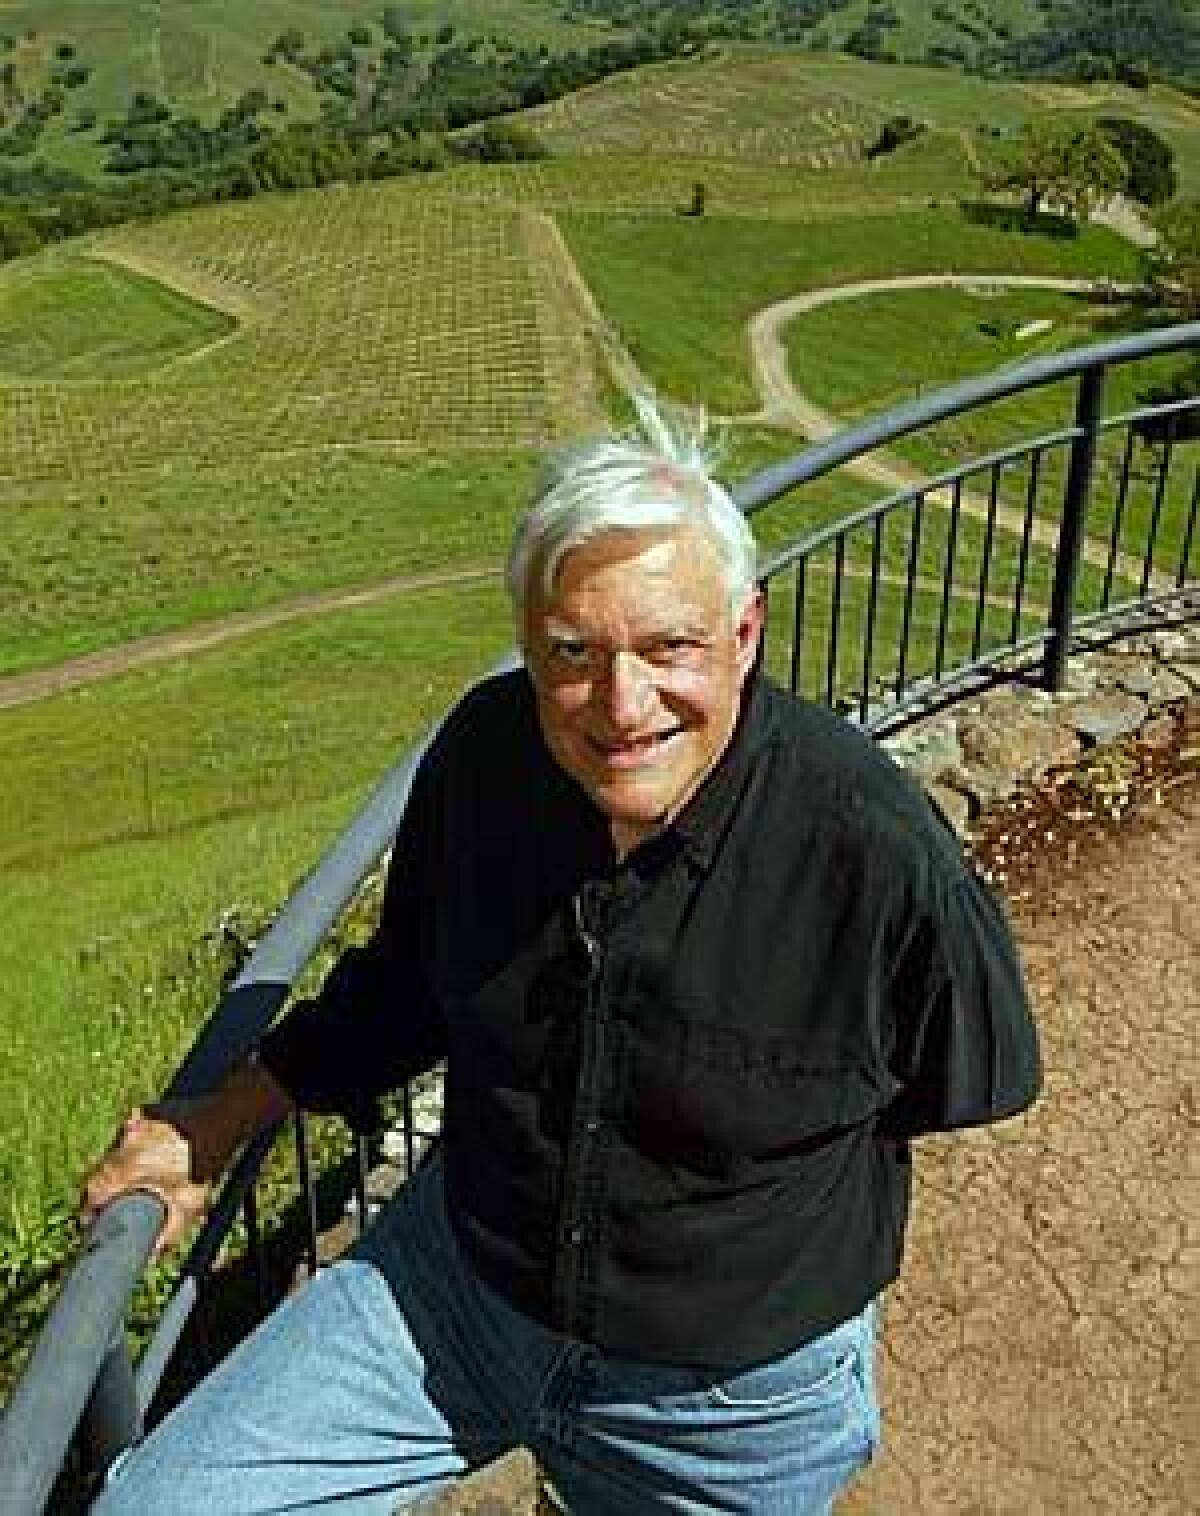 Jess Jackson, at one of his mountain vineyards above Santa Rosa, helped create the Kendall-Jackson success by using grapes from multiple vineyards.